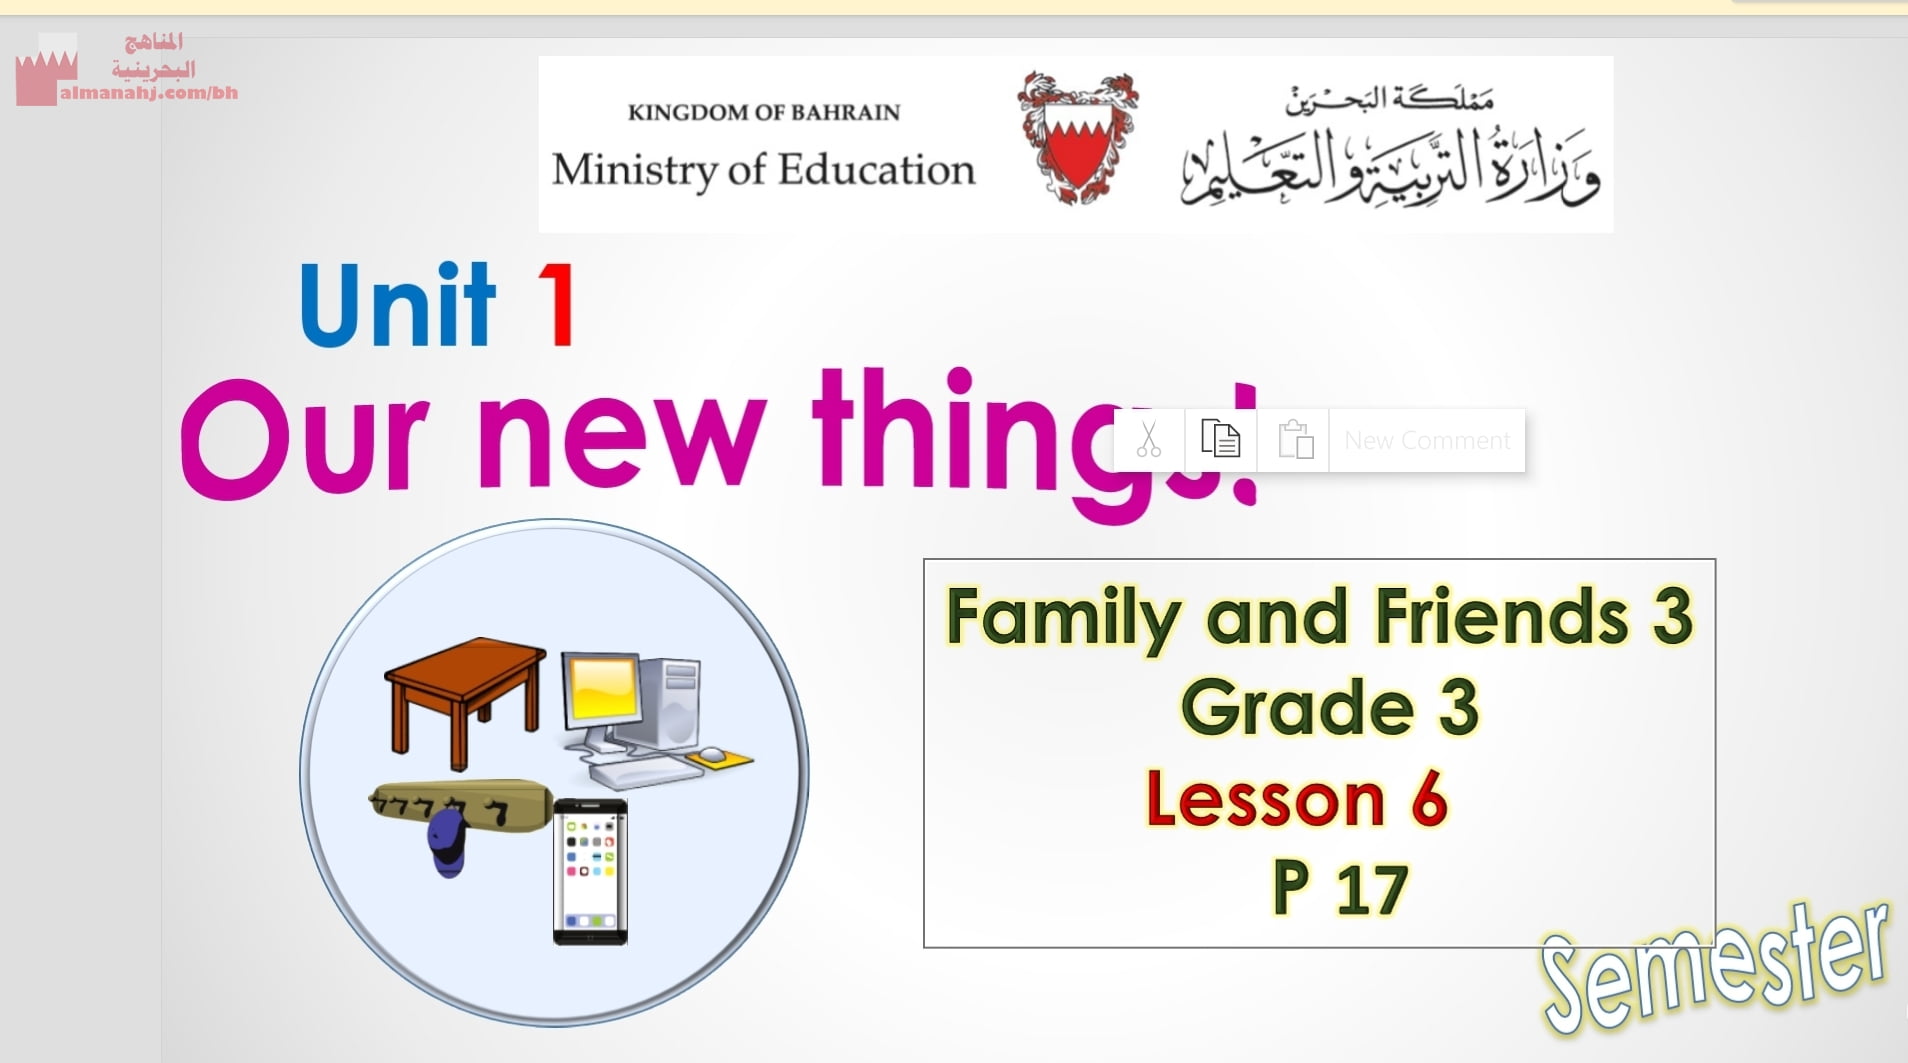 Our new things family and friends lesson 6 PowerPoint presentation